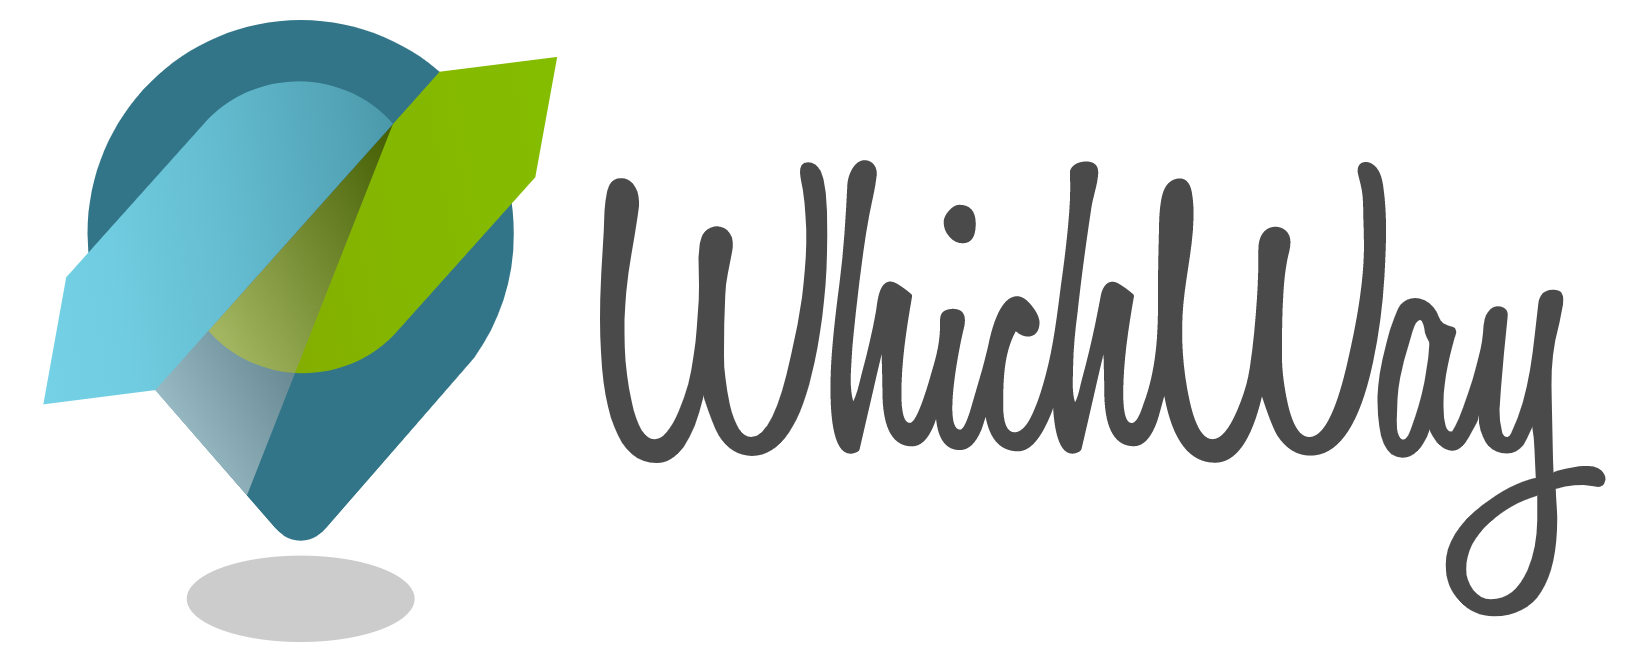 WhichWay logo that has "WhichWay" in grey letters over a white background and a green and blue circle logo. 